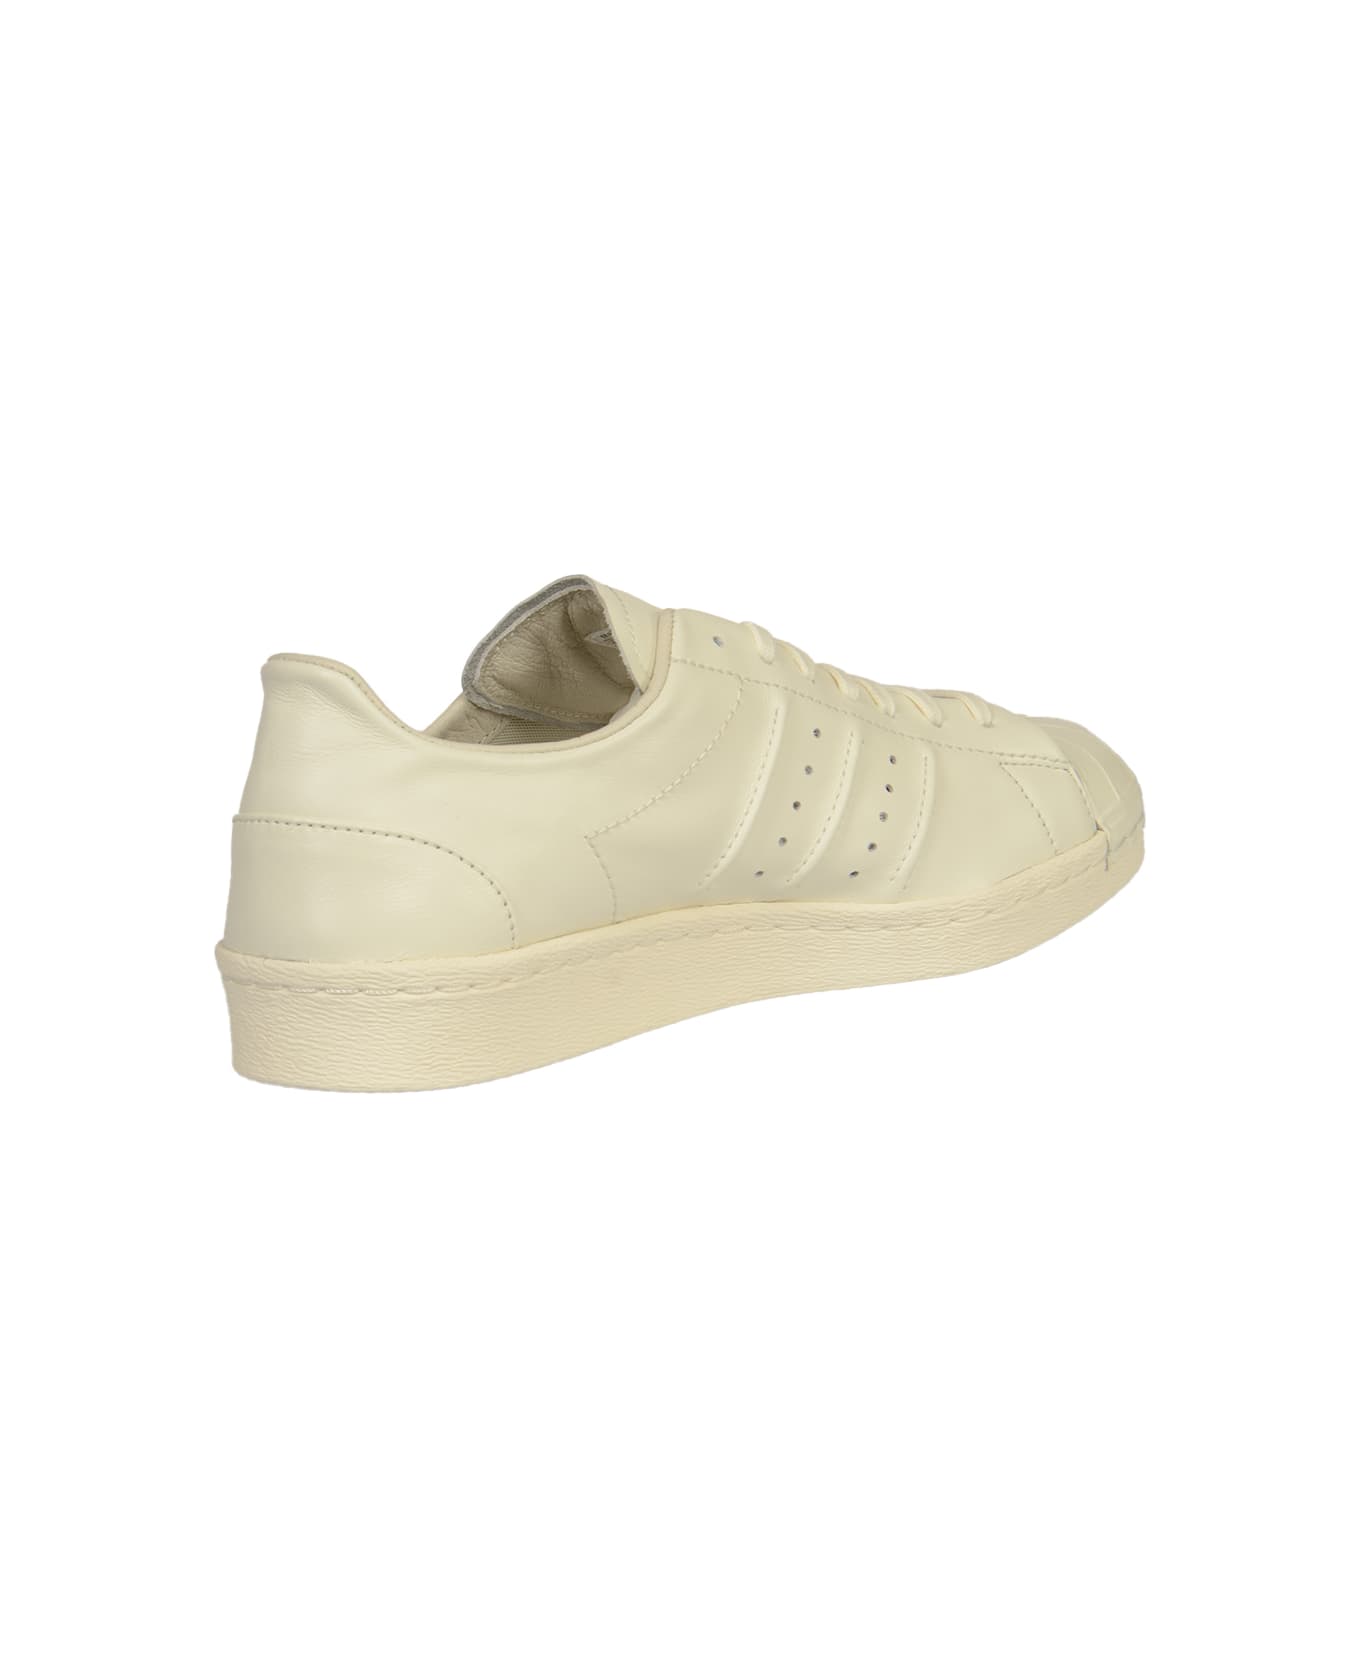 Y-3 Superstar Sneakers - Off White スニーカー